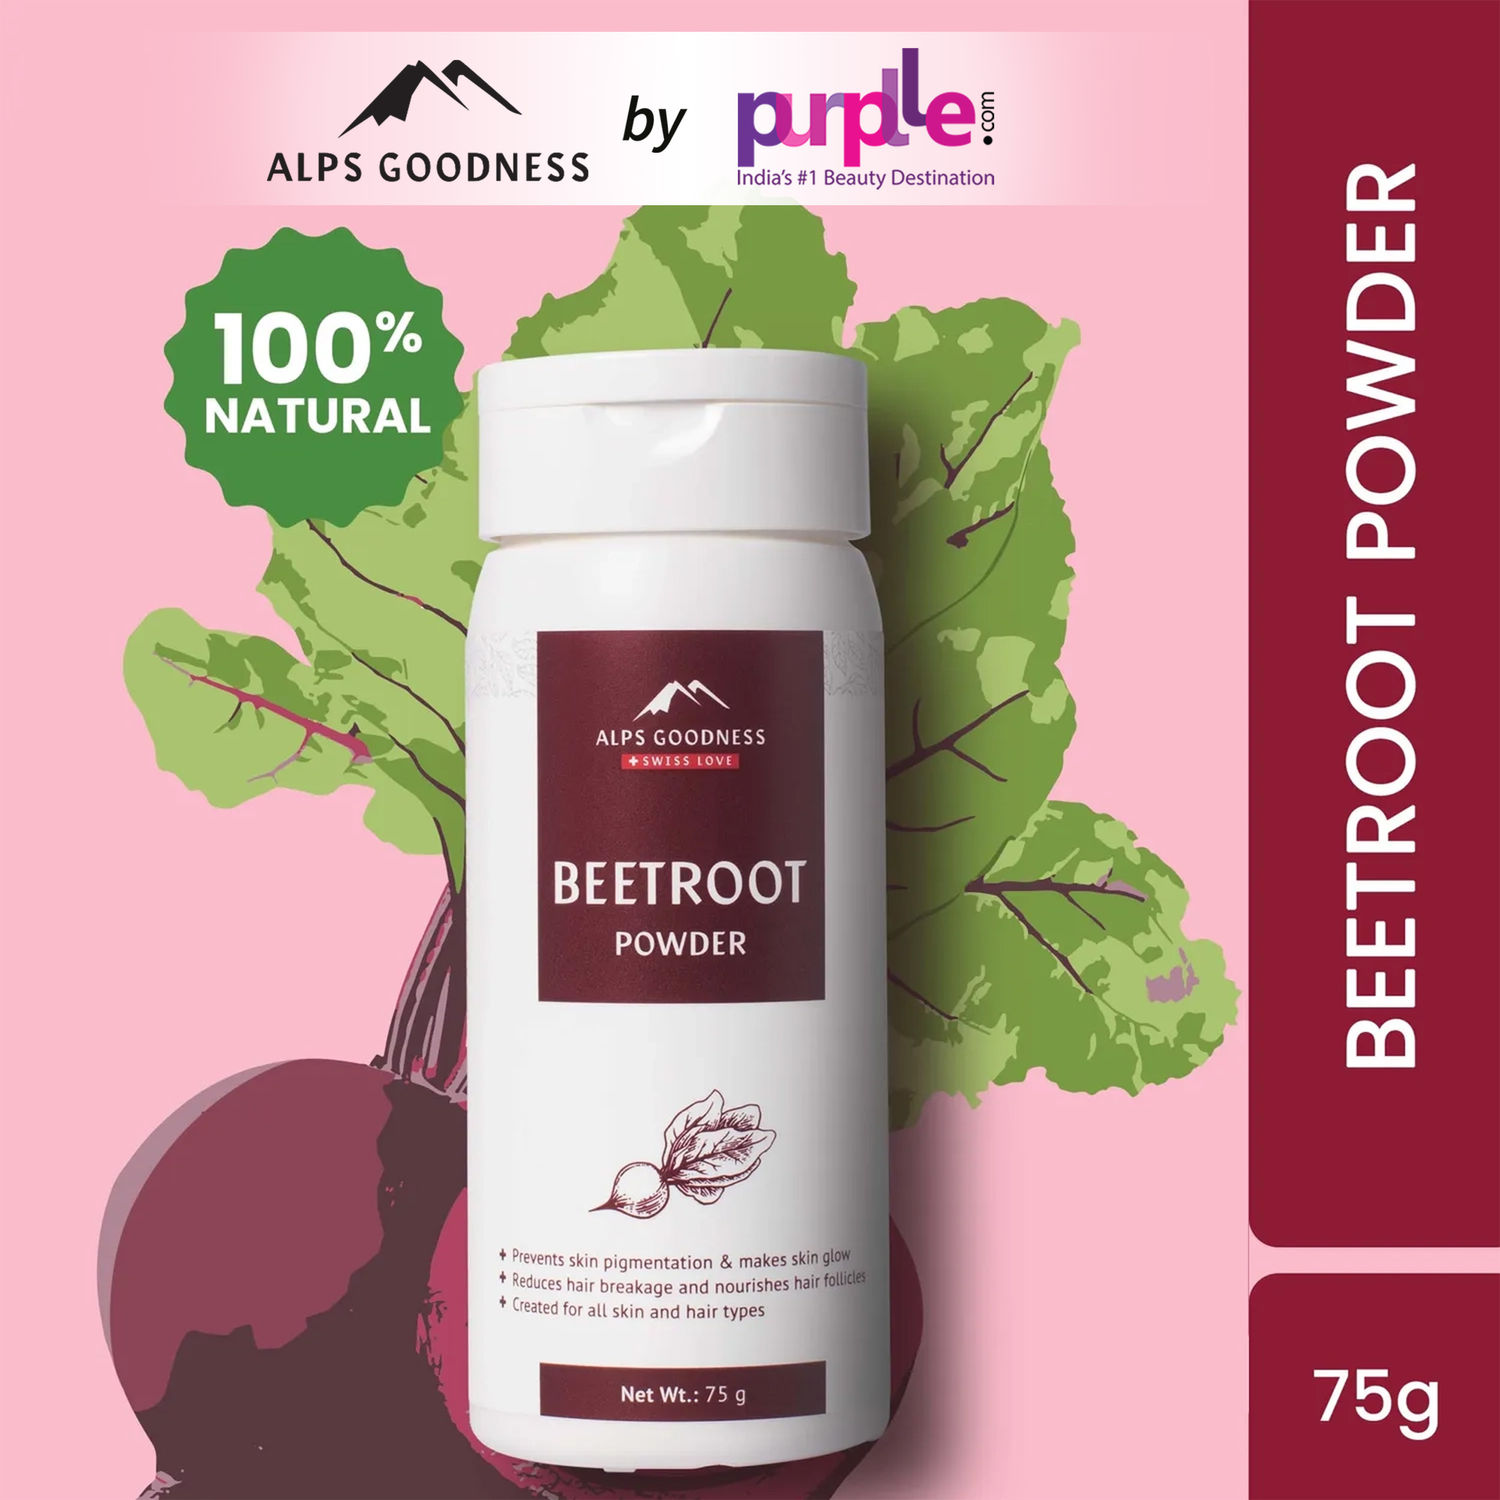 Alps Goodness Powder - Beetroot (75 g)| 100% Natural Powder | No Chemicals, No Preservatives, No Pesticides | Can be used for Hair Mask and Face Mask |Beetroot Face Pack